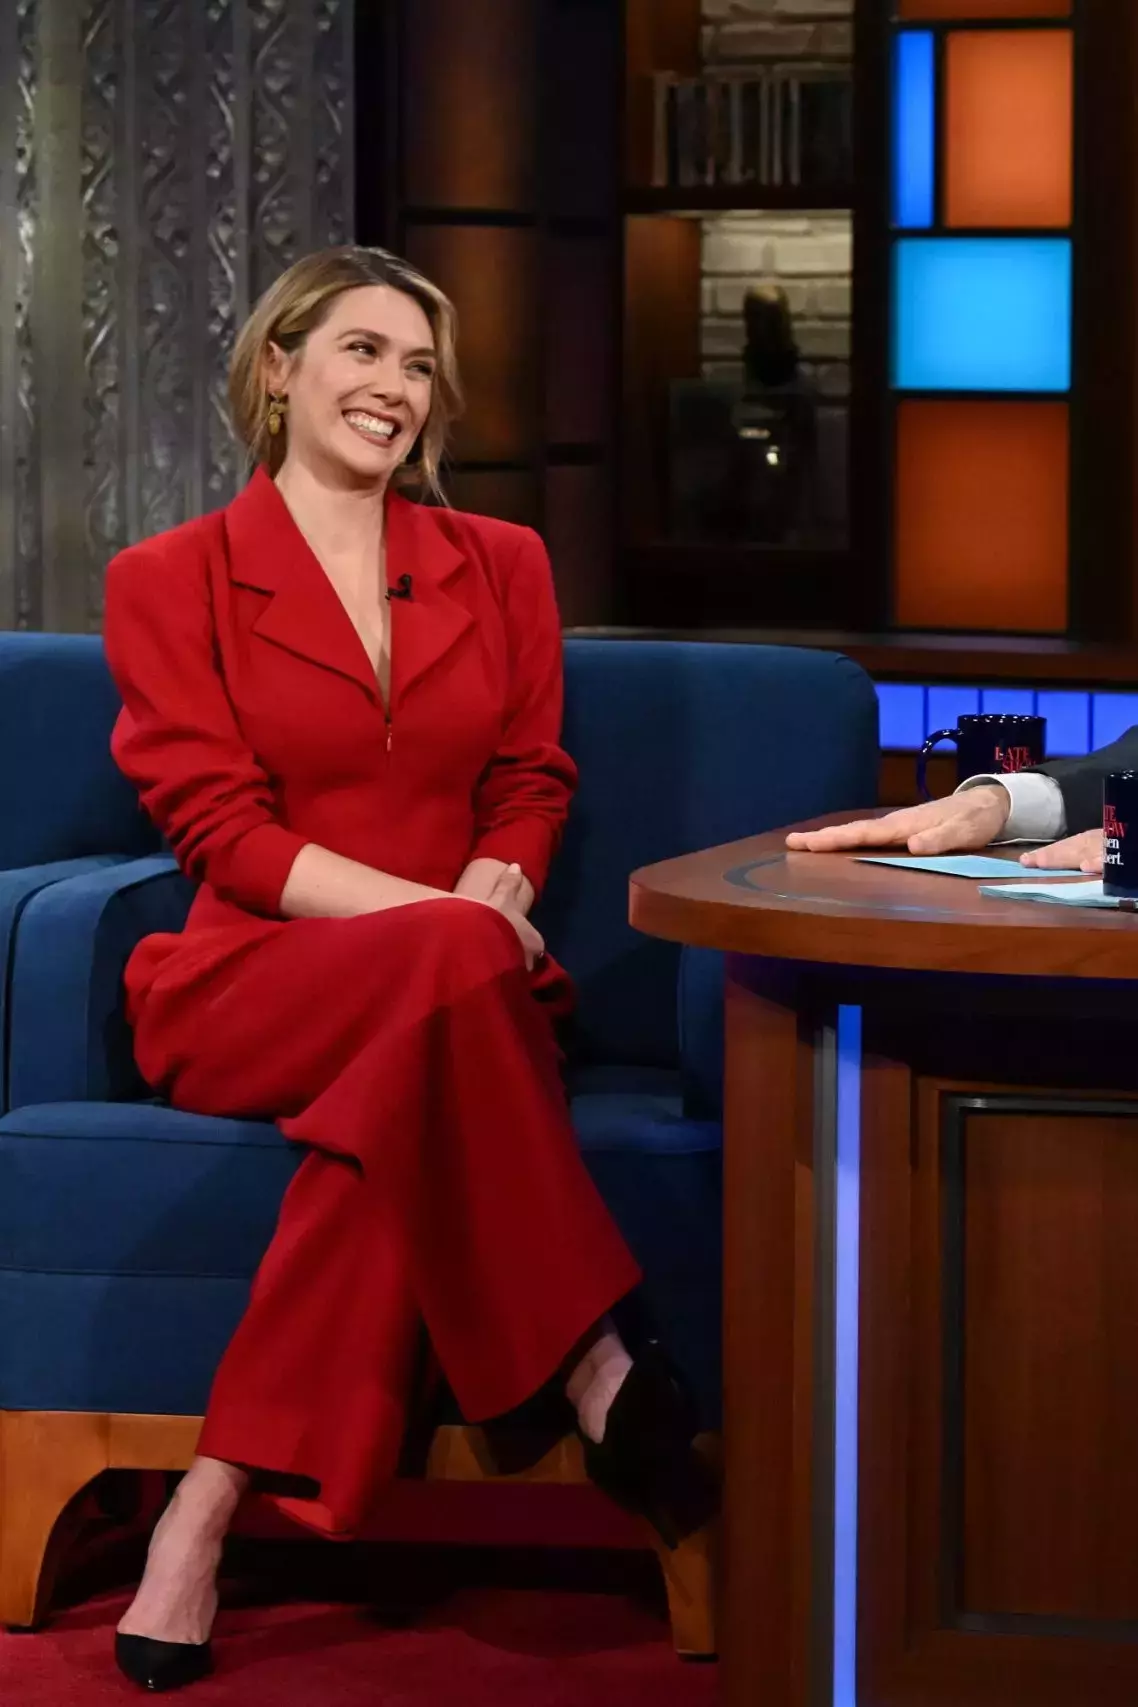 Elizabeth Olsen Outfits and Hairstyles